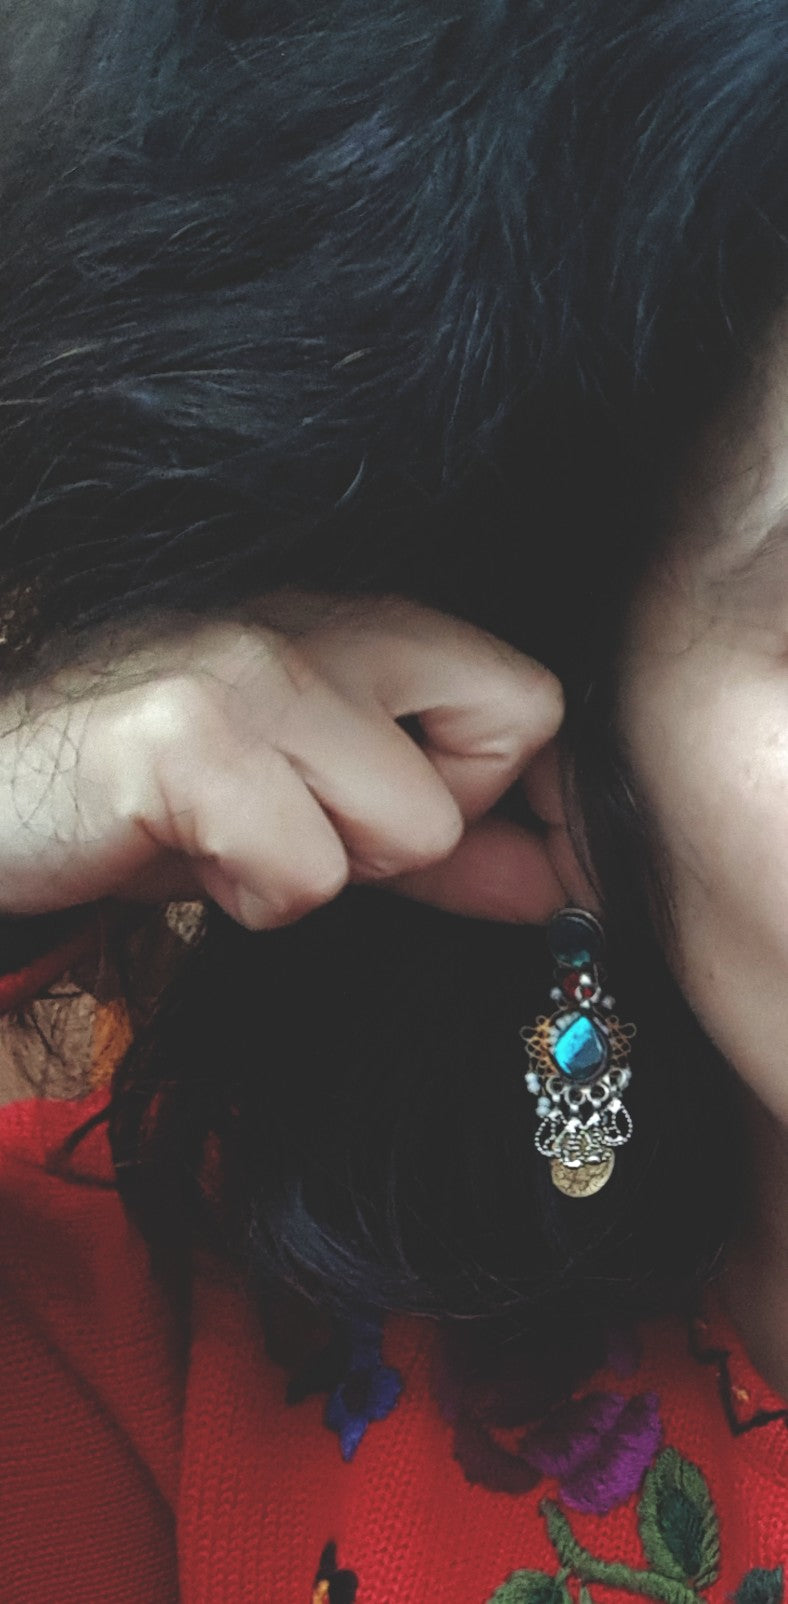 Rajasthani Earrings with Blue Glass